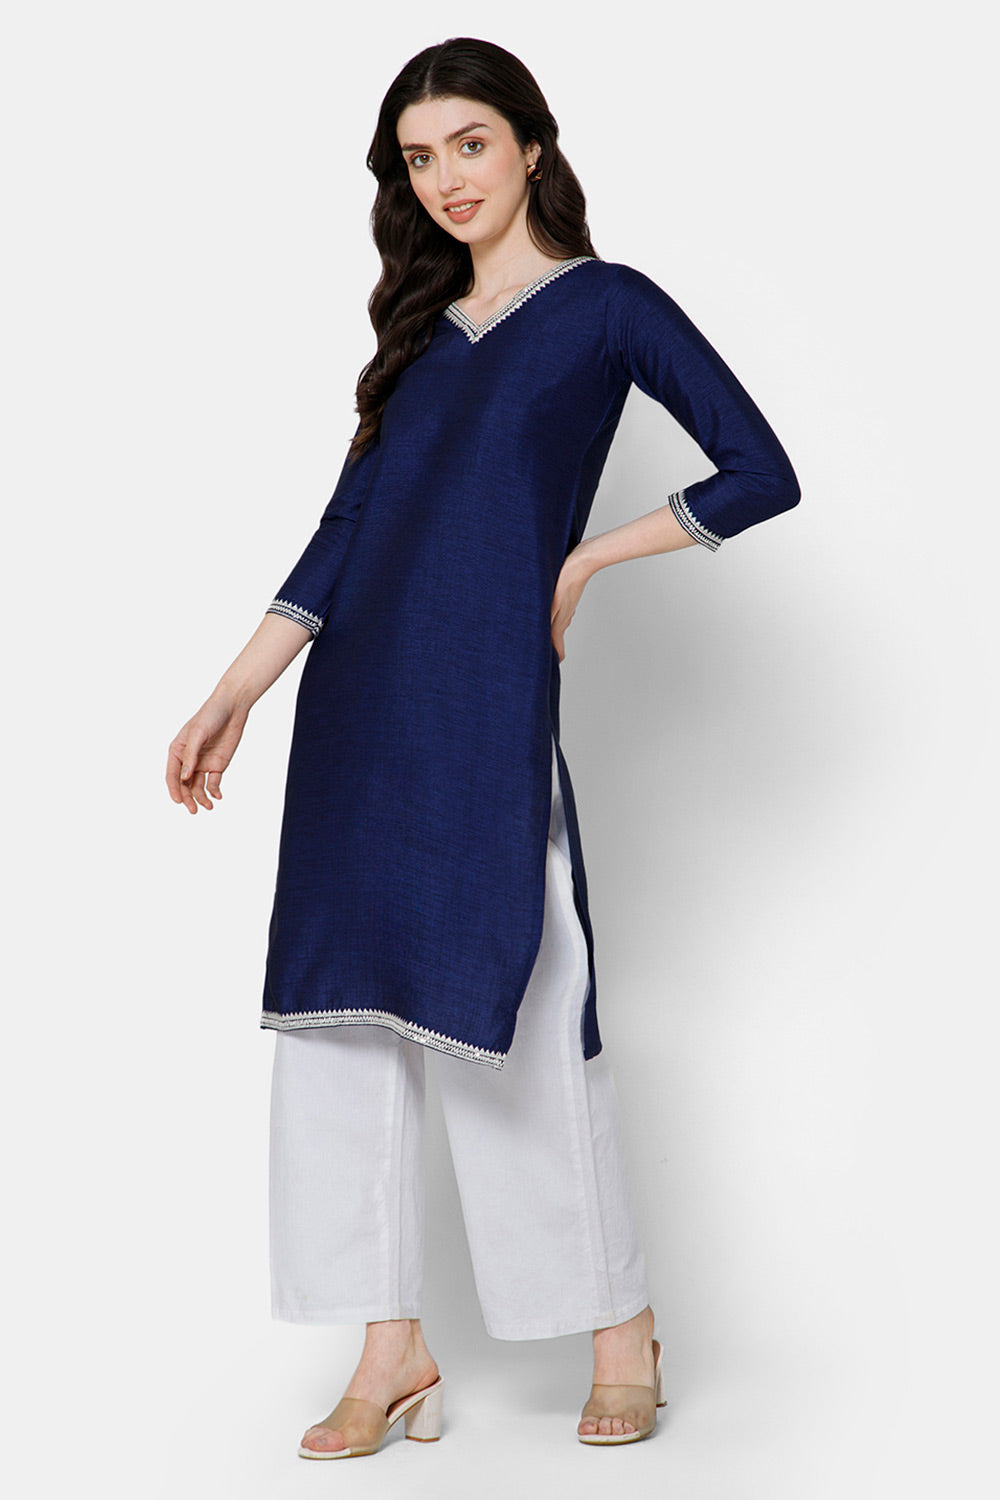 Mythri Women's Casual Kurthi with Minimalistic Embroidery At The Neckline - Blue - E075